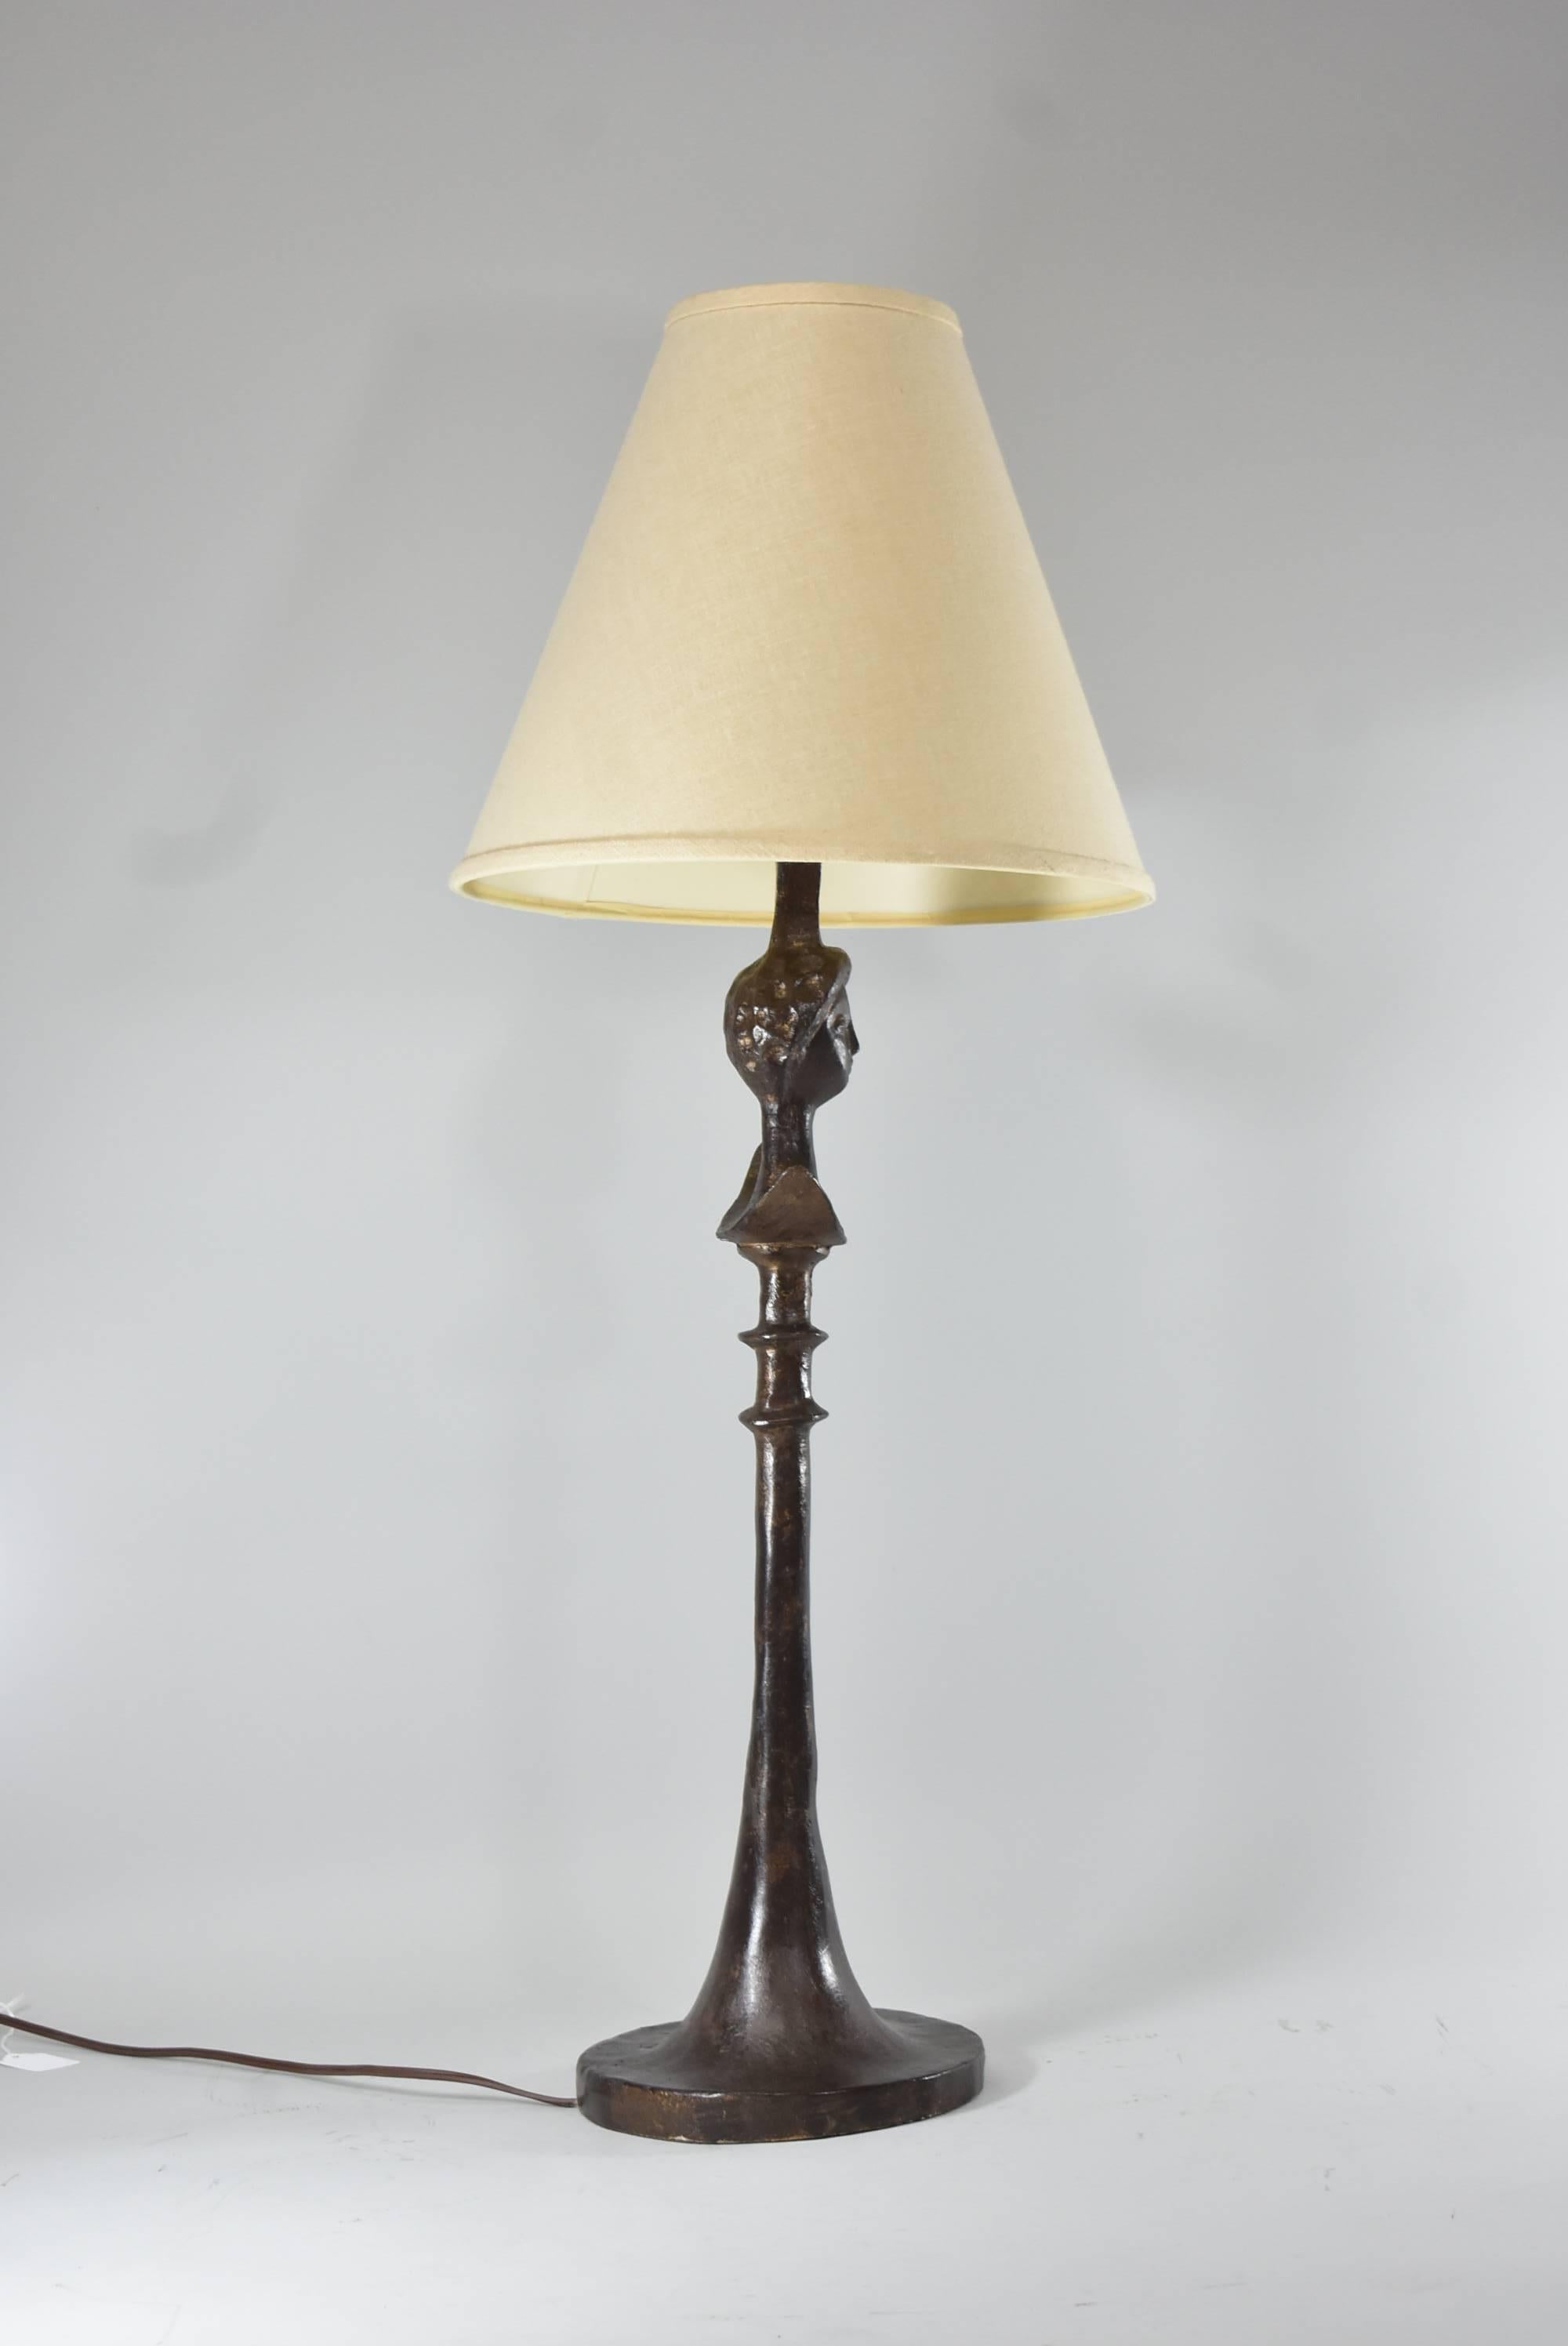 Single socket bronze tone Tete De Femme table lamp with figural lady. Design by Giacometti after Arkitektura.